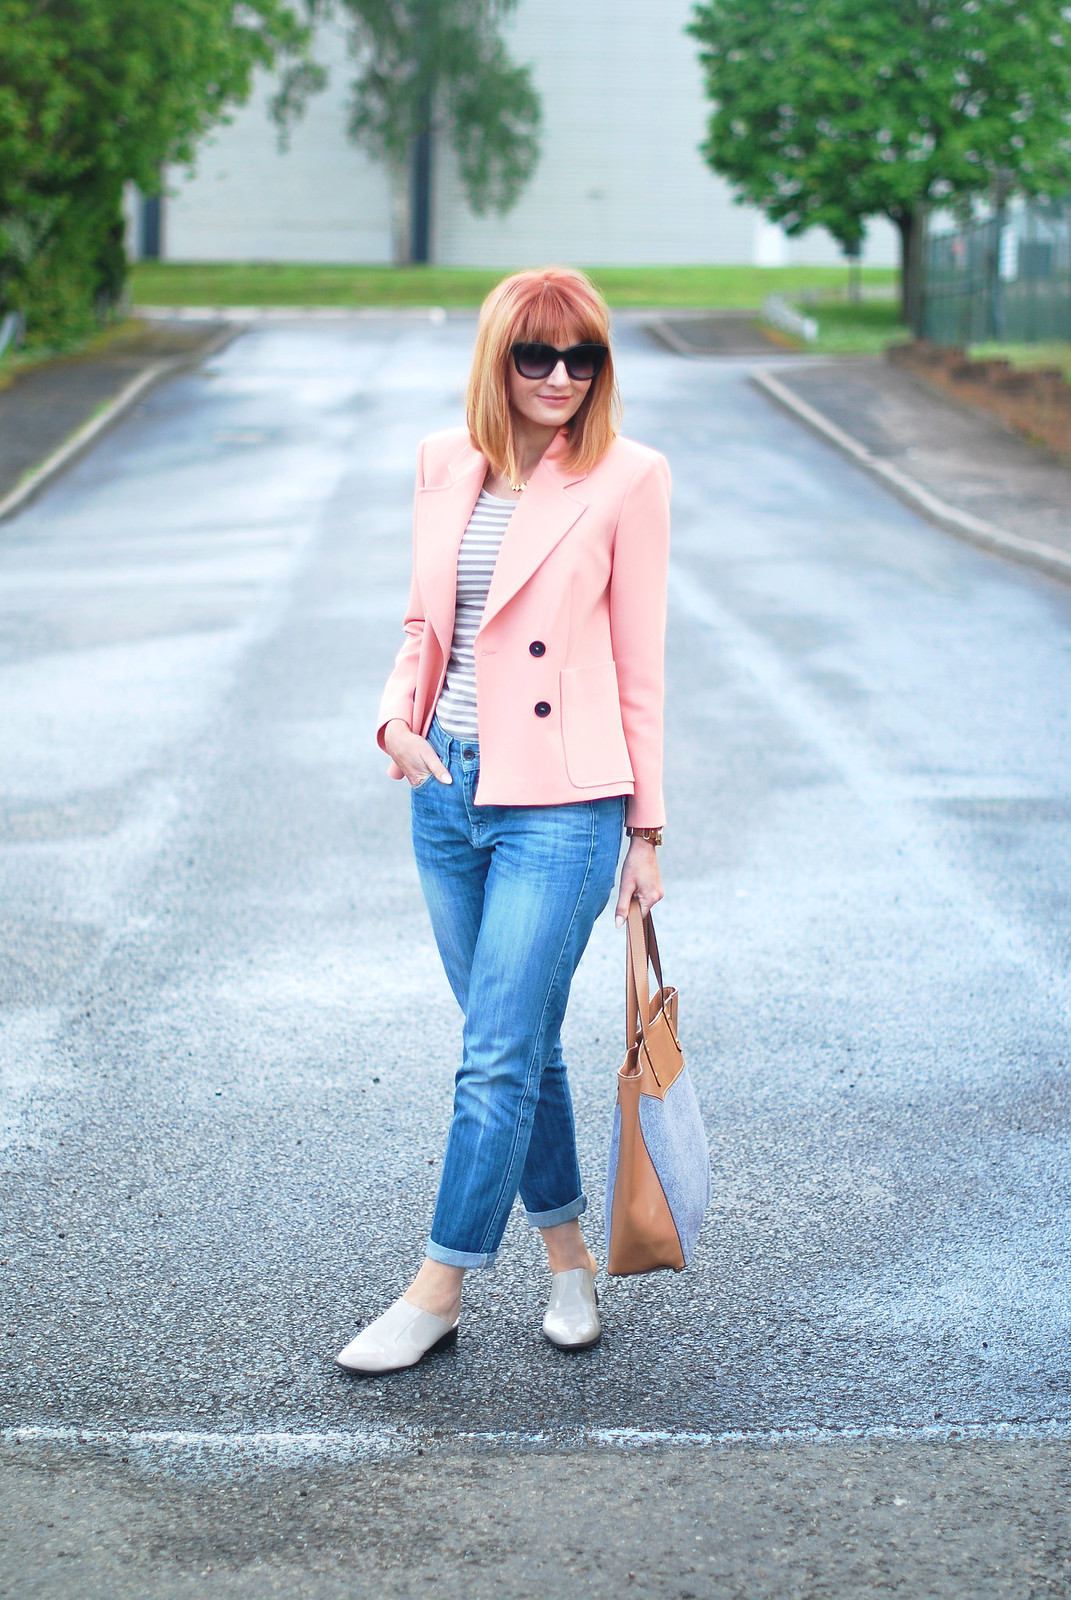 Relaxed Spring/Summer Style: Peach double breasted jacket, Breton striped top, boyfriend jeans | Not Dressed As Lamb